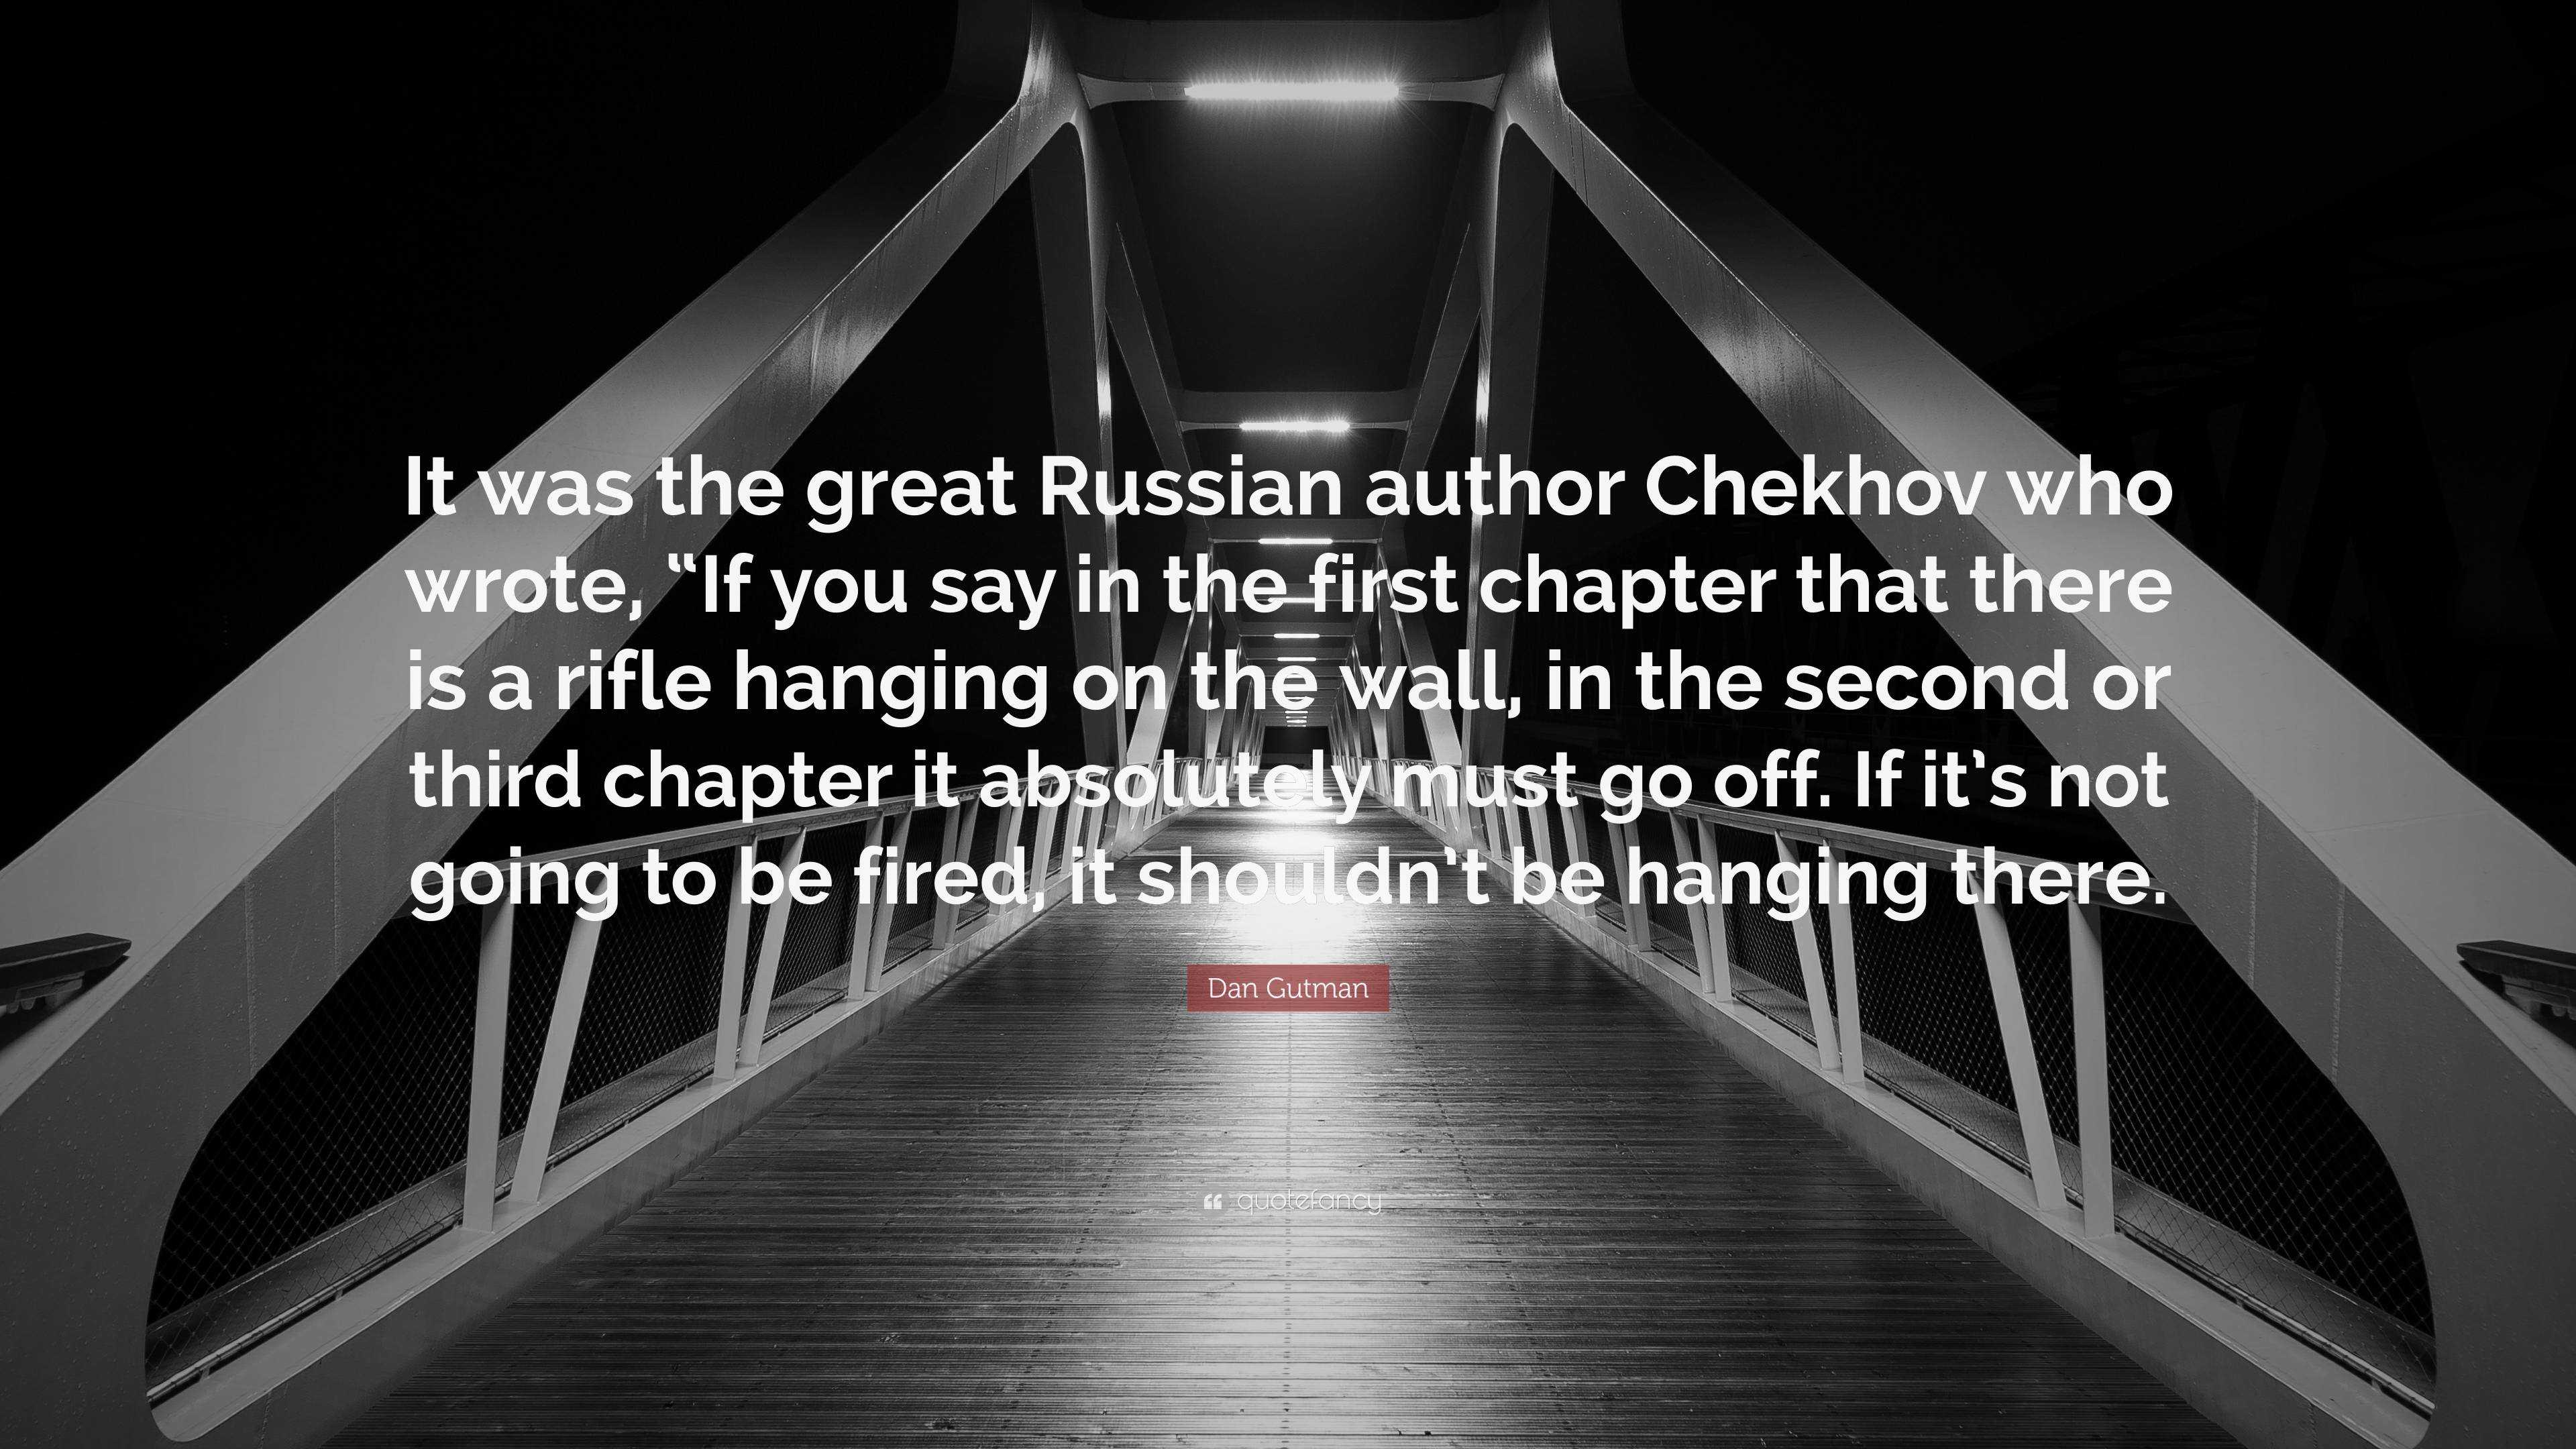 Dan Gutman Quote: “It was the great Russian author Chekhov who wrote, “If  you say in the first chapter that there is a rifle hanging on the...”